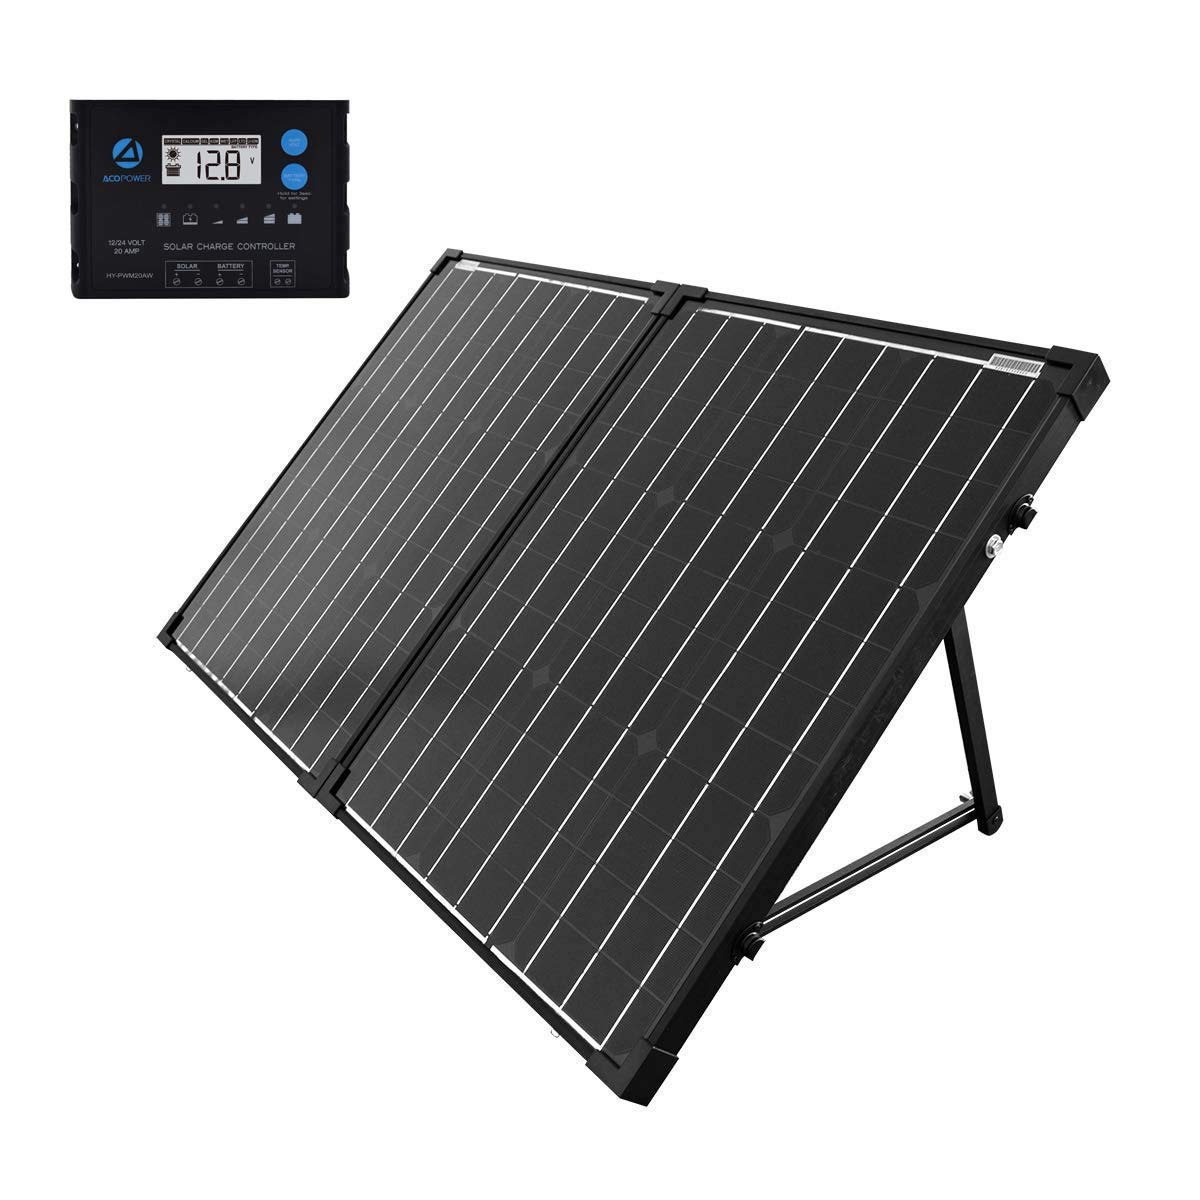 Portable Solar Panel kit Foldable Waterproof 20A Charge